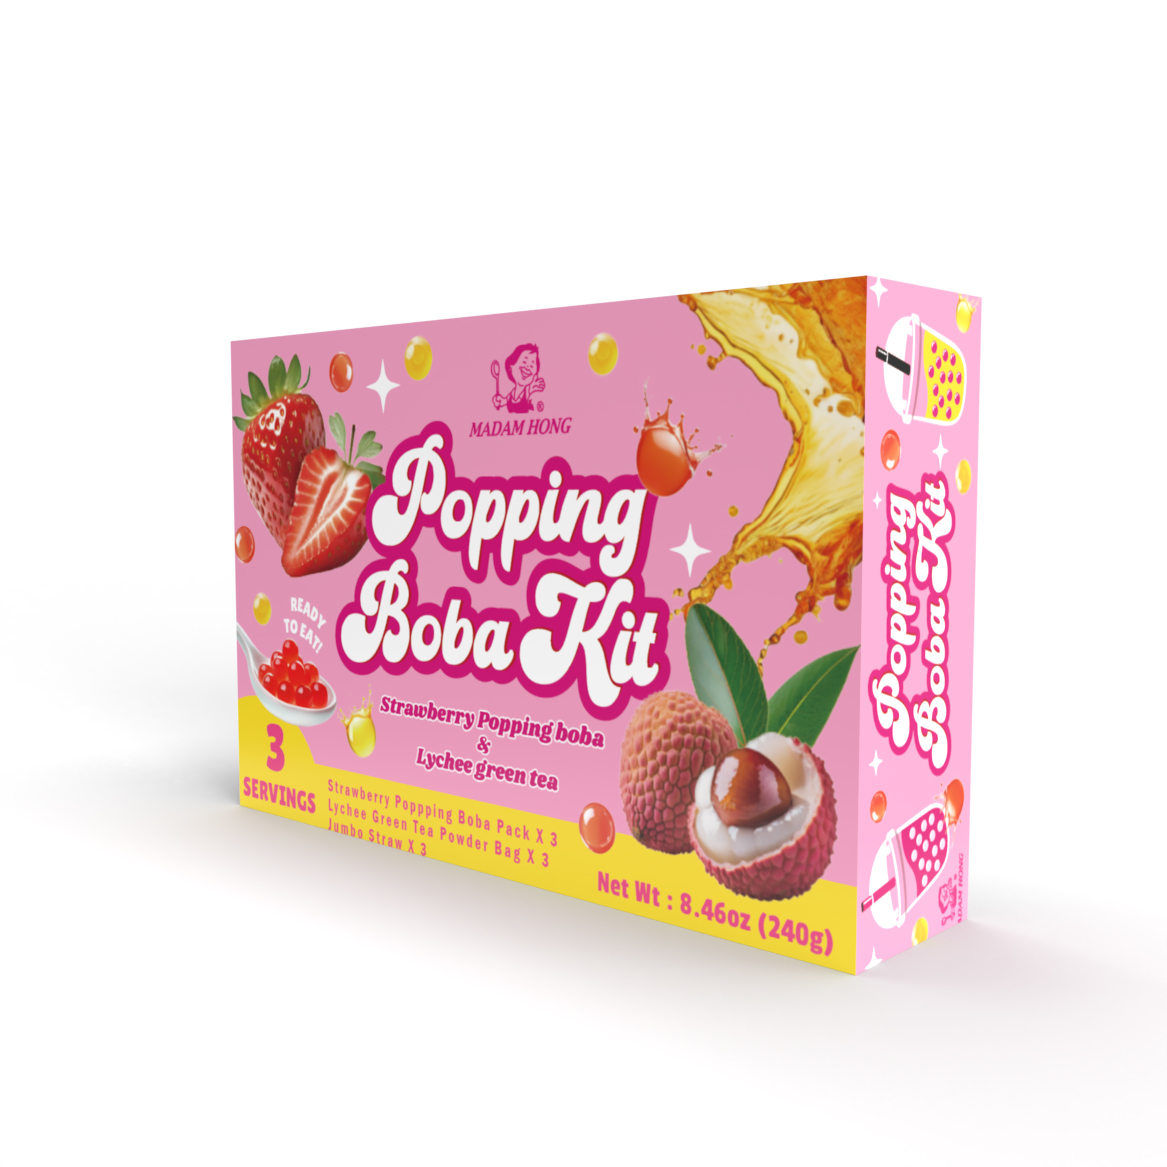 Strawberry Popping Boba with Lychee Green Tea Kit